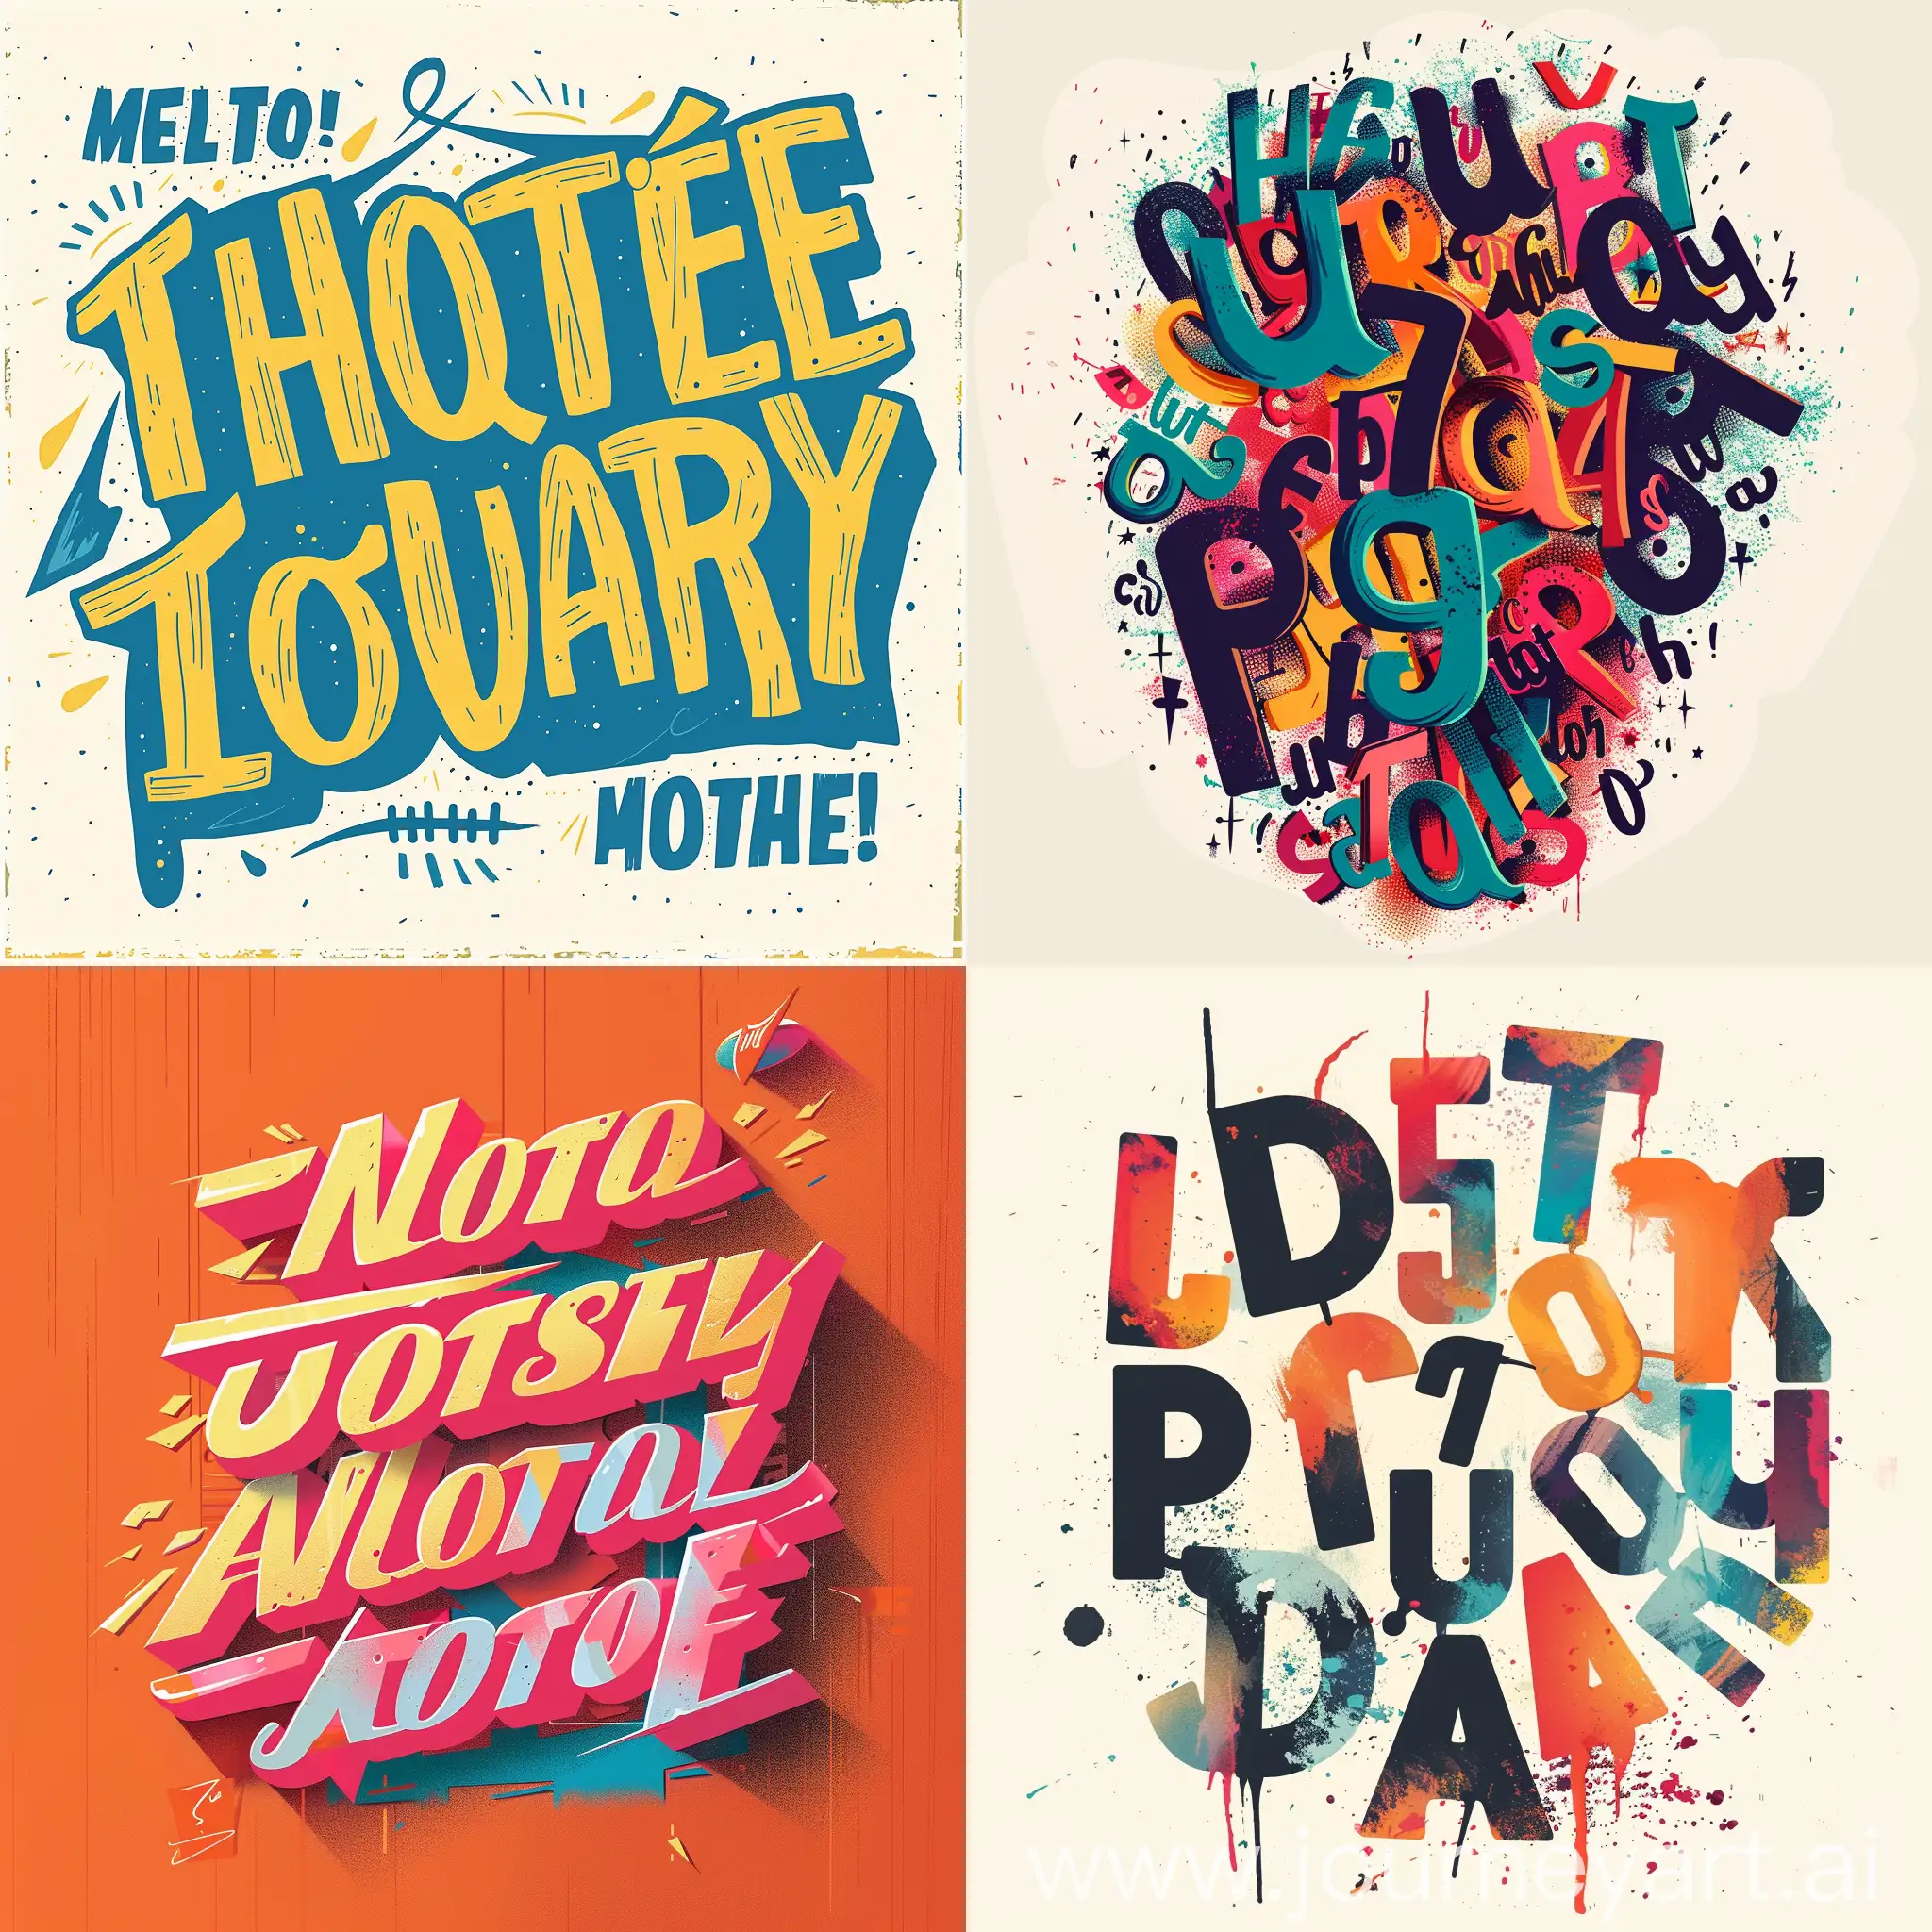 Motivational-Typography-Artwork-with-Vibrant-Colors-and-Asymmetric-Composition